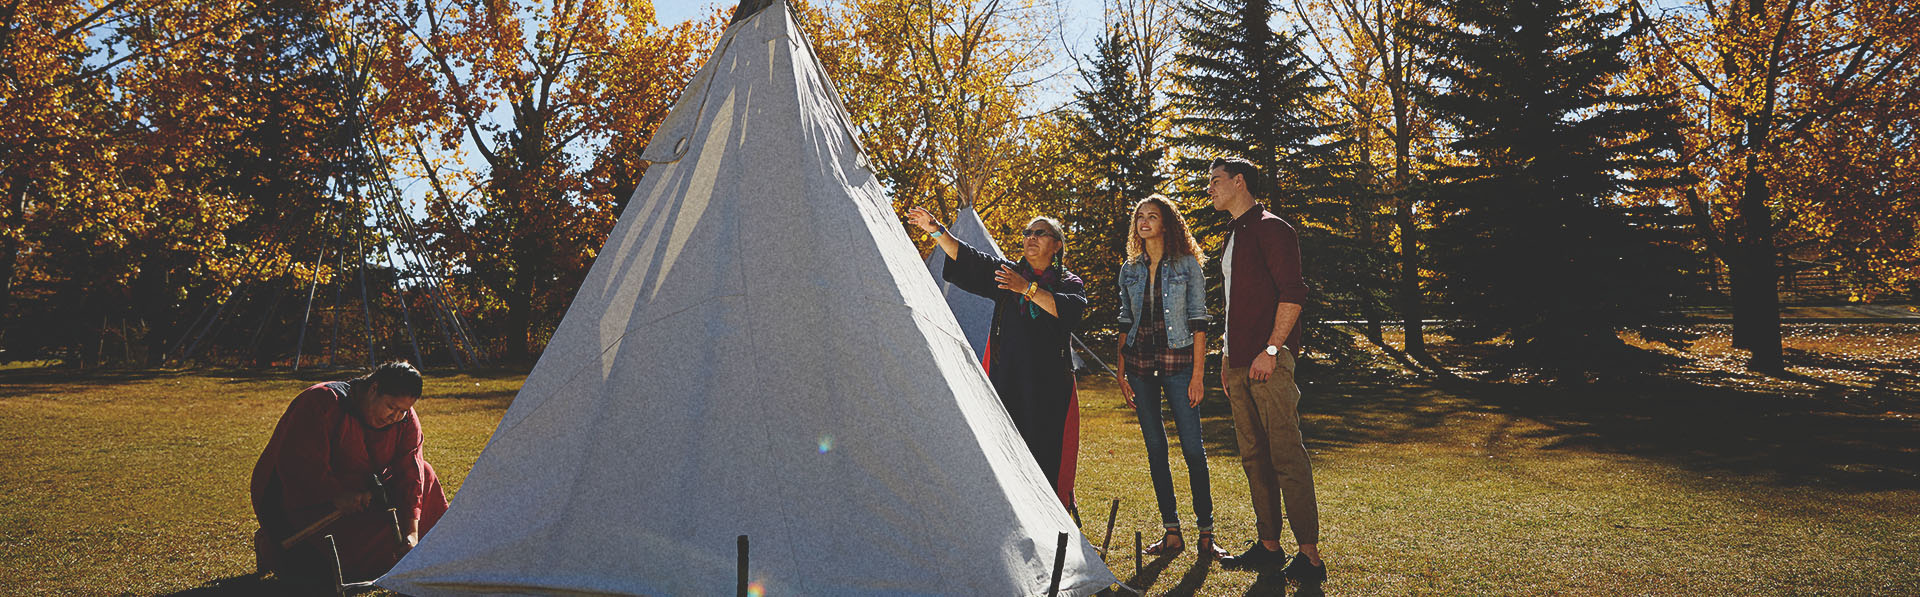 People learning how to set up a tipi at Heritage Park